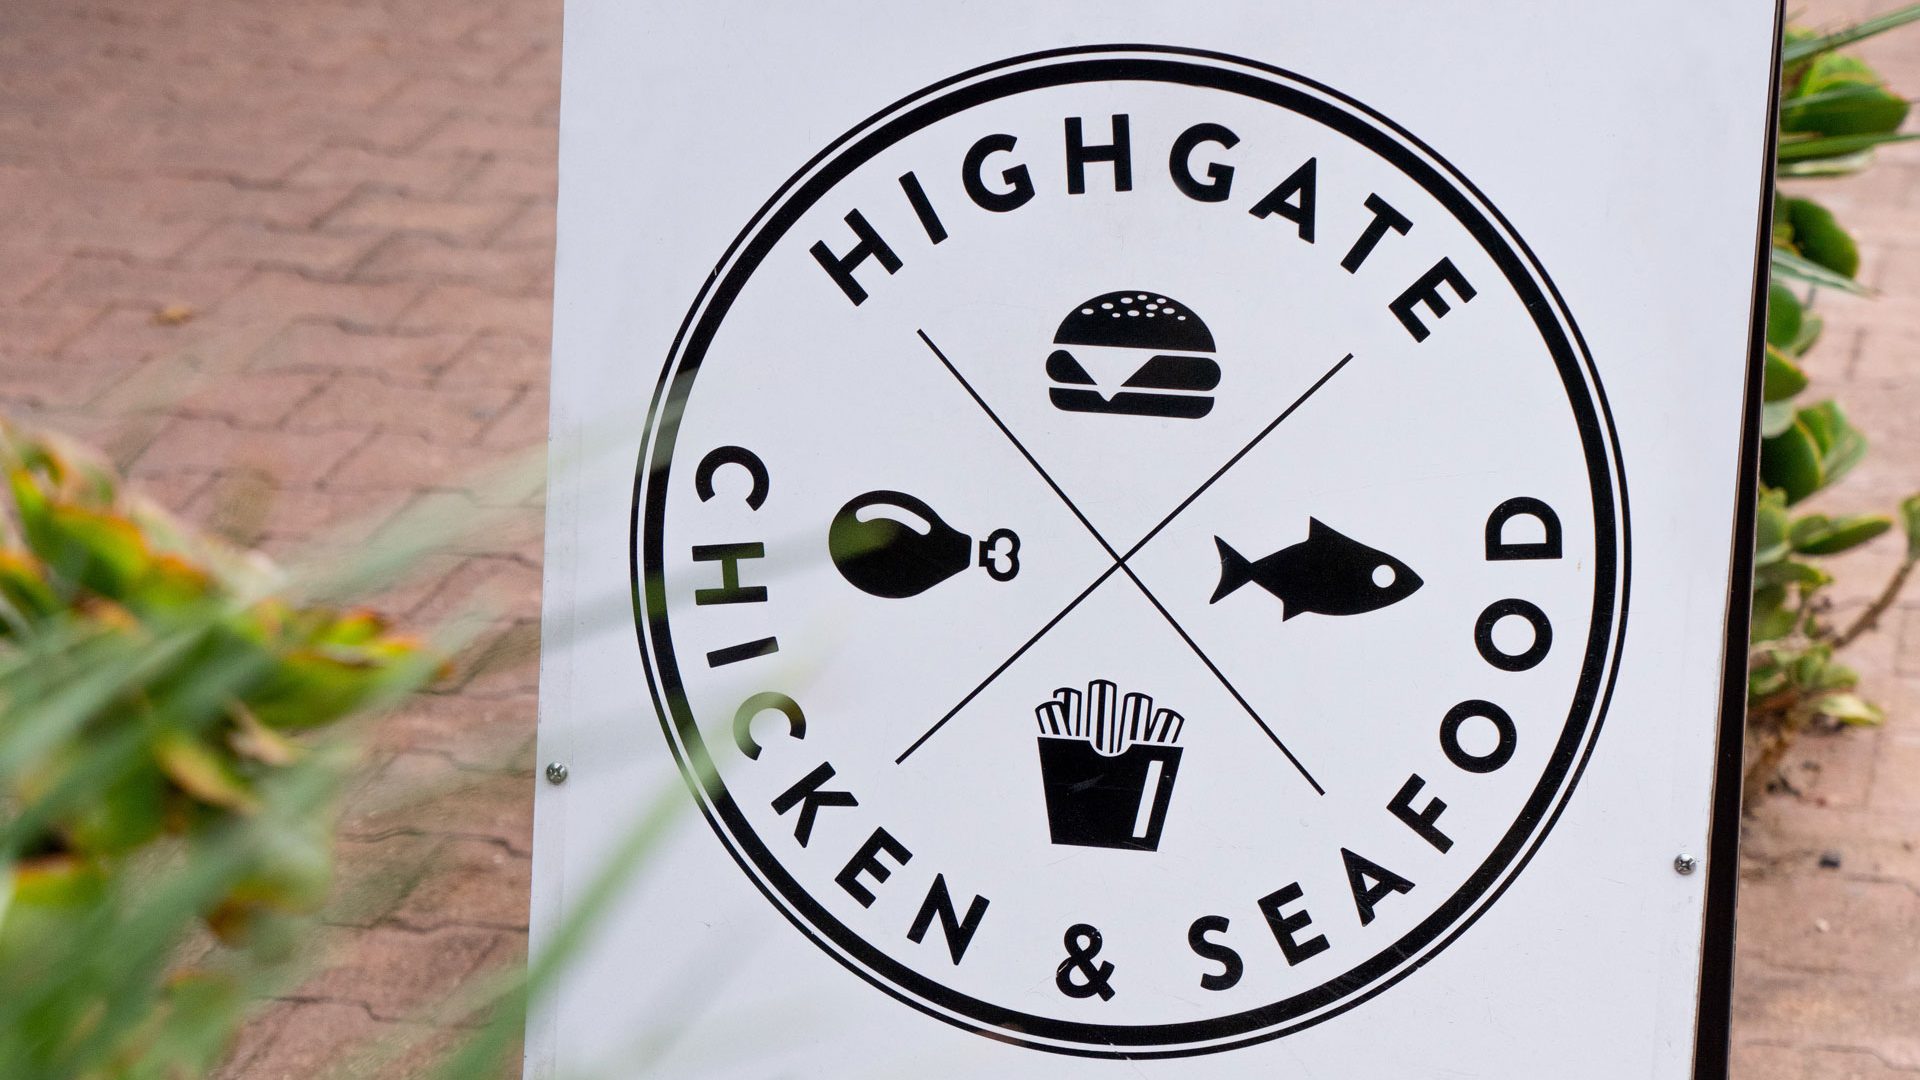 Highgate Chicken and Seafood